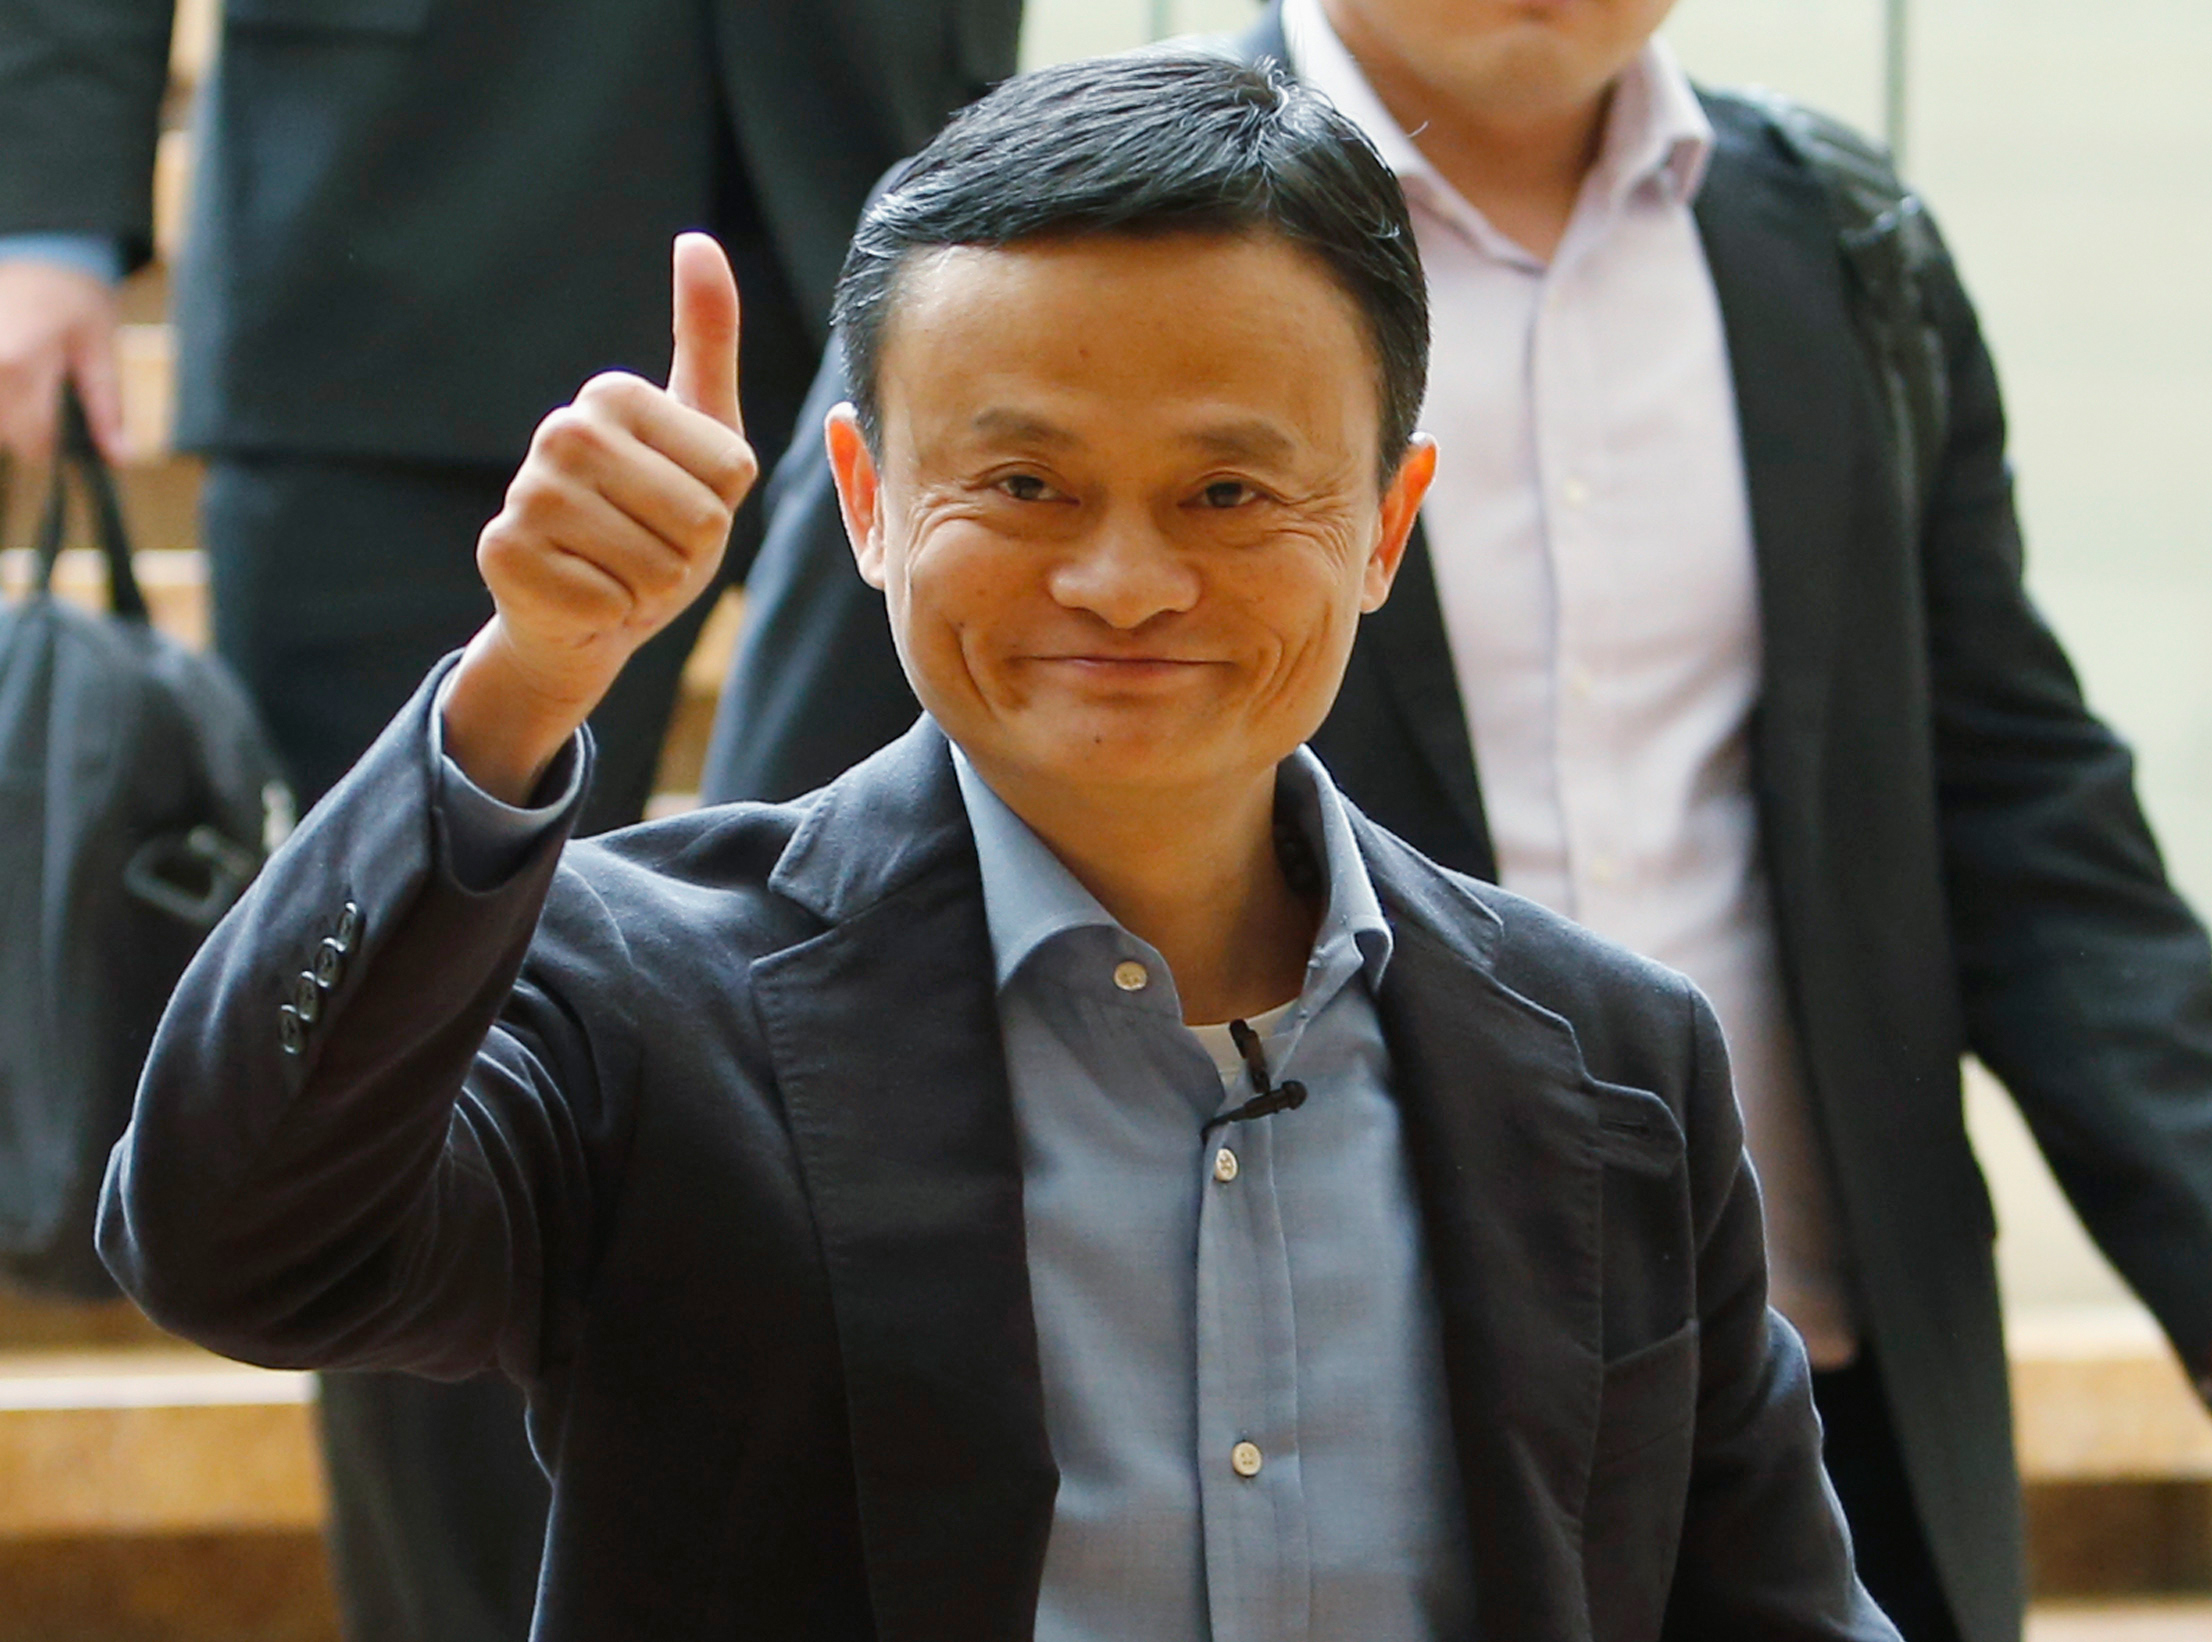 5 Winners and 5 Losers of the Alibaba IPO